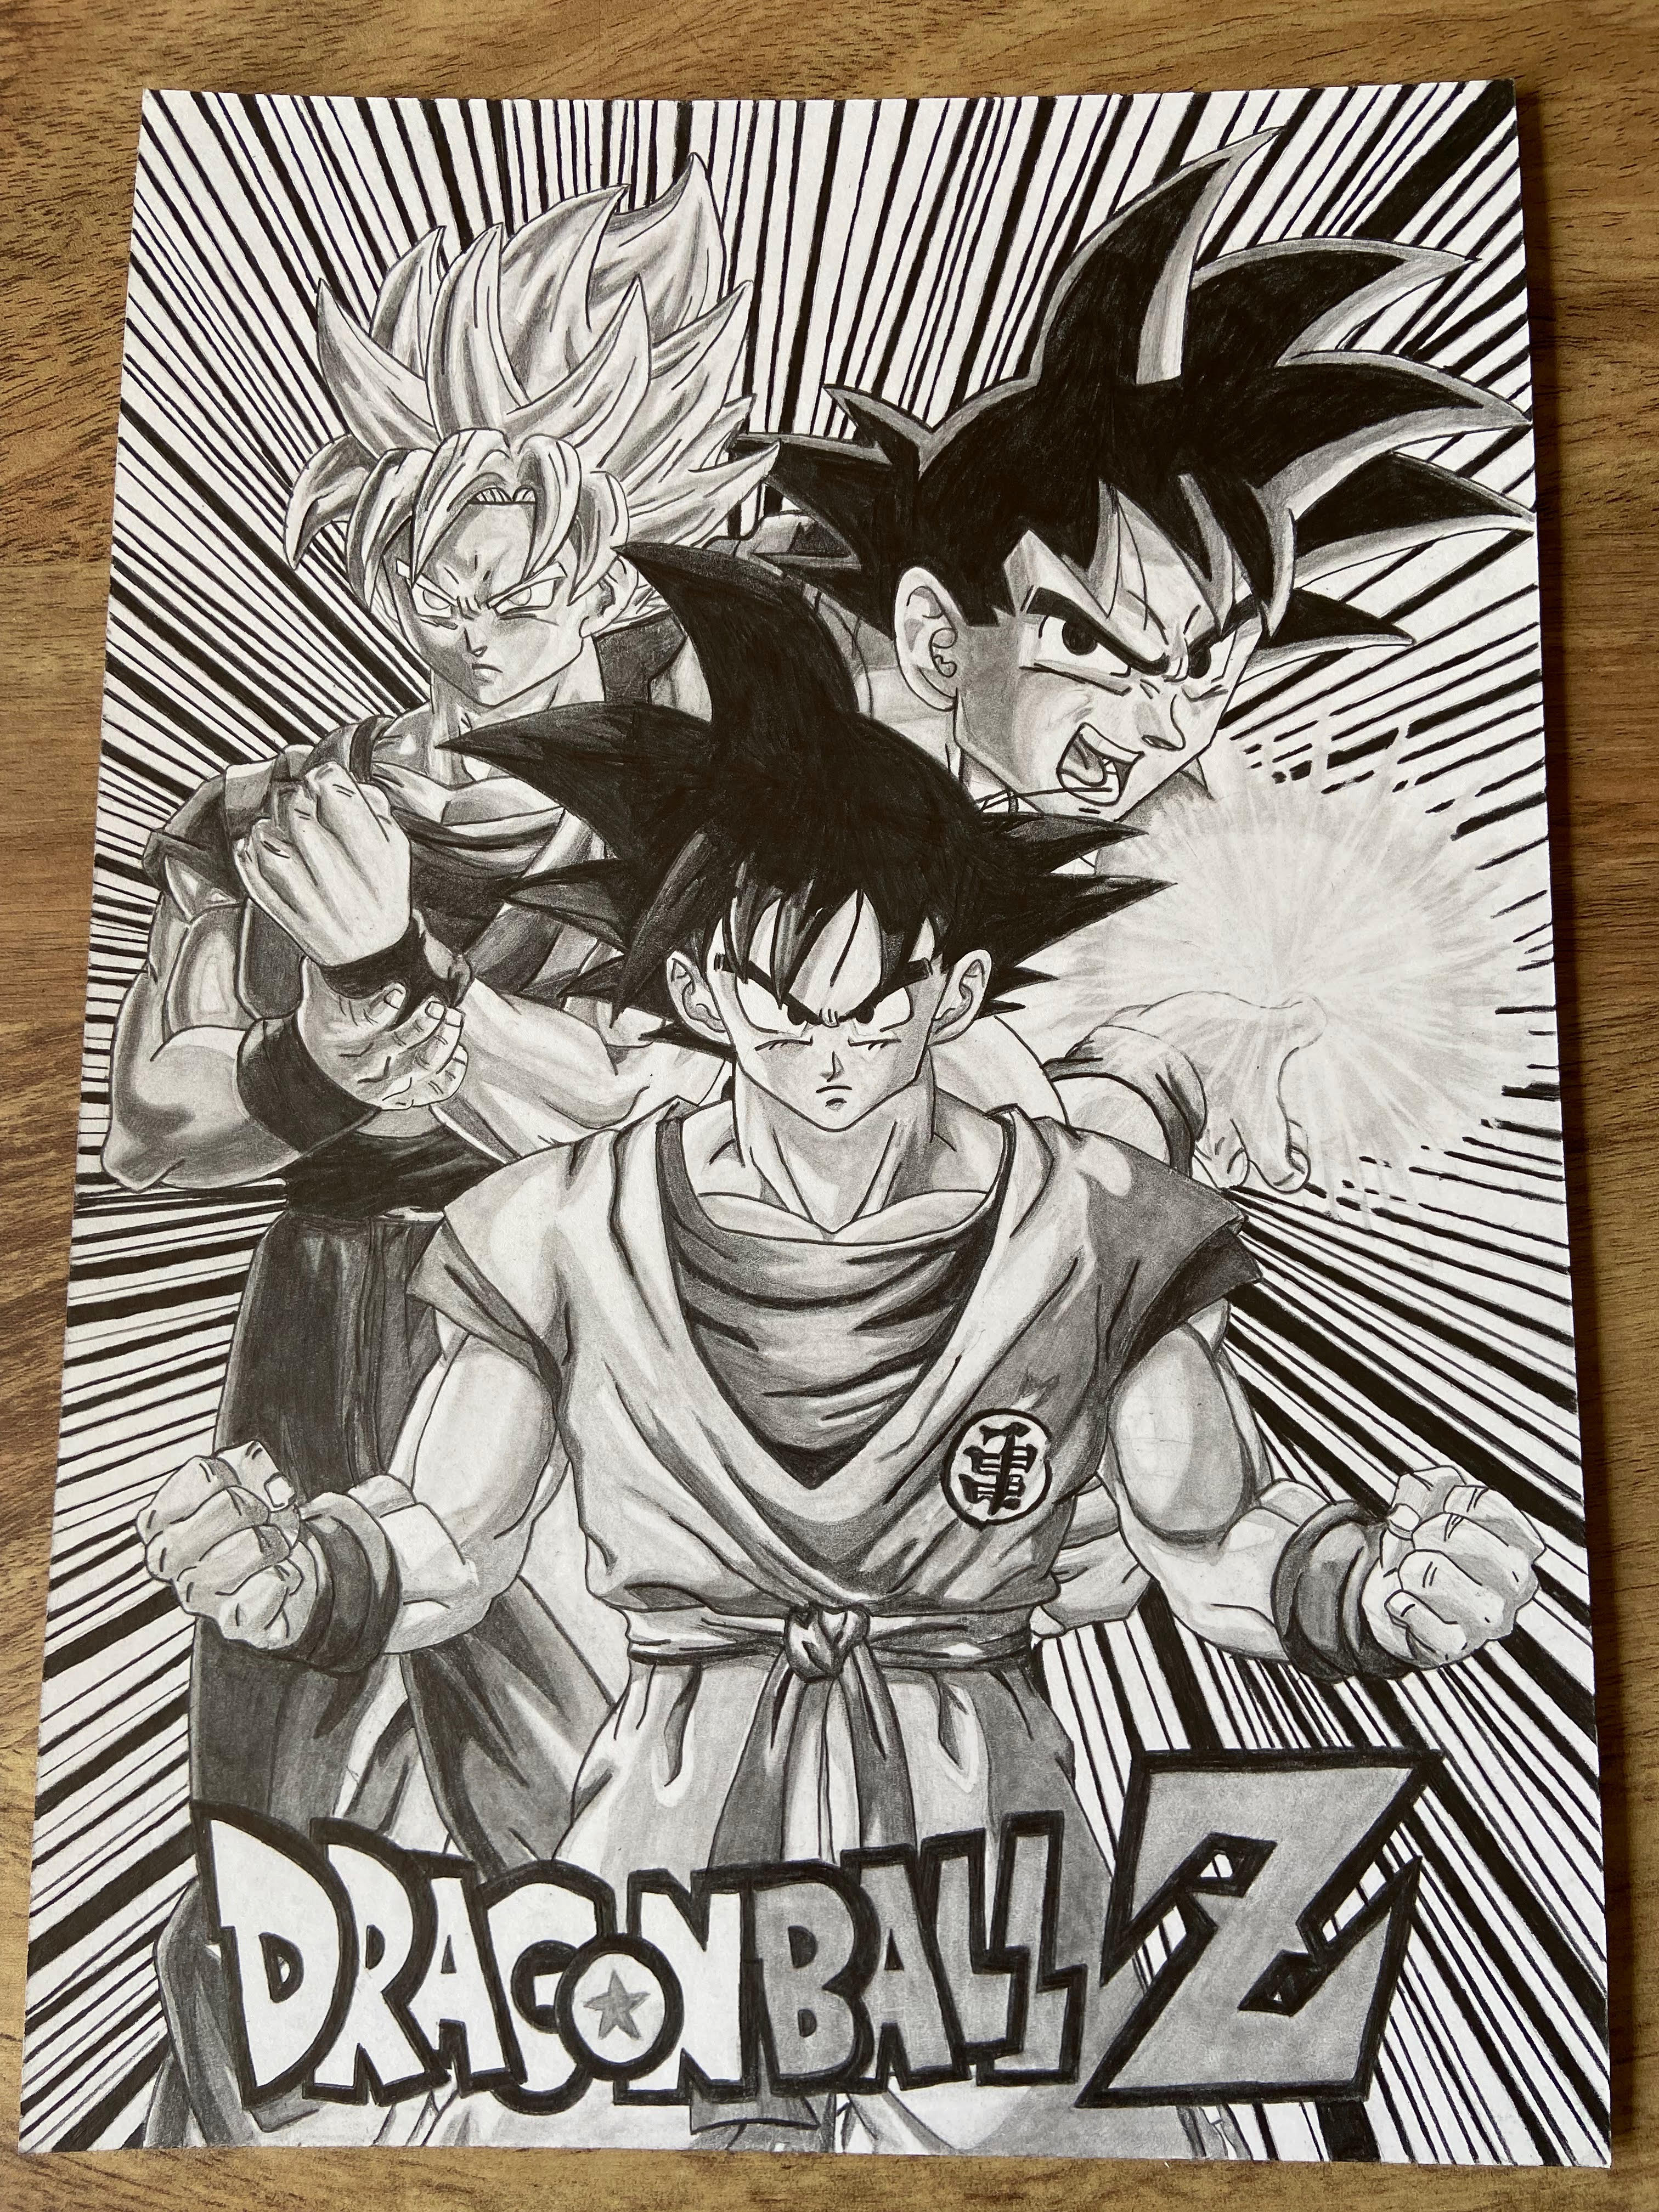 Pencil drawing of Goku from the anime series 'DragonBall Z